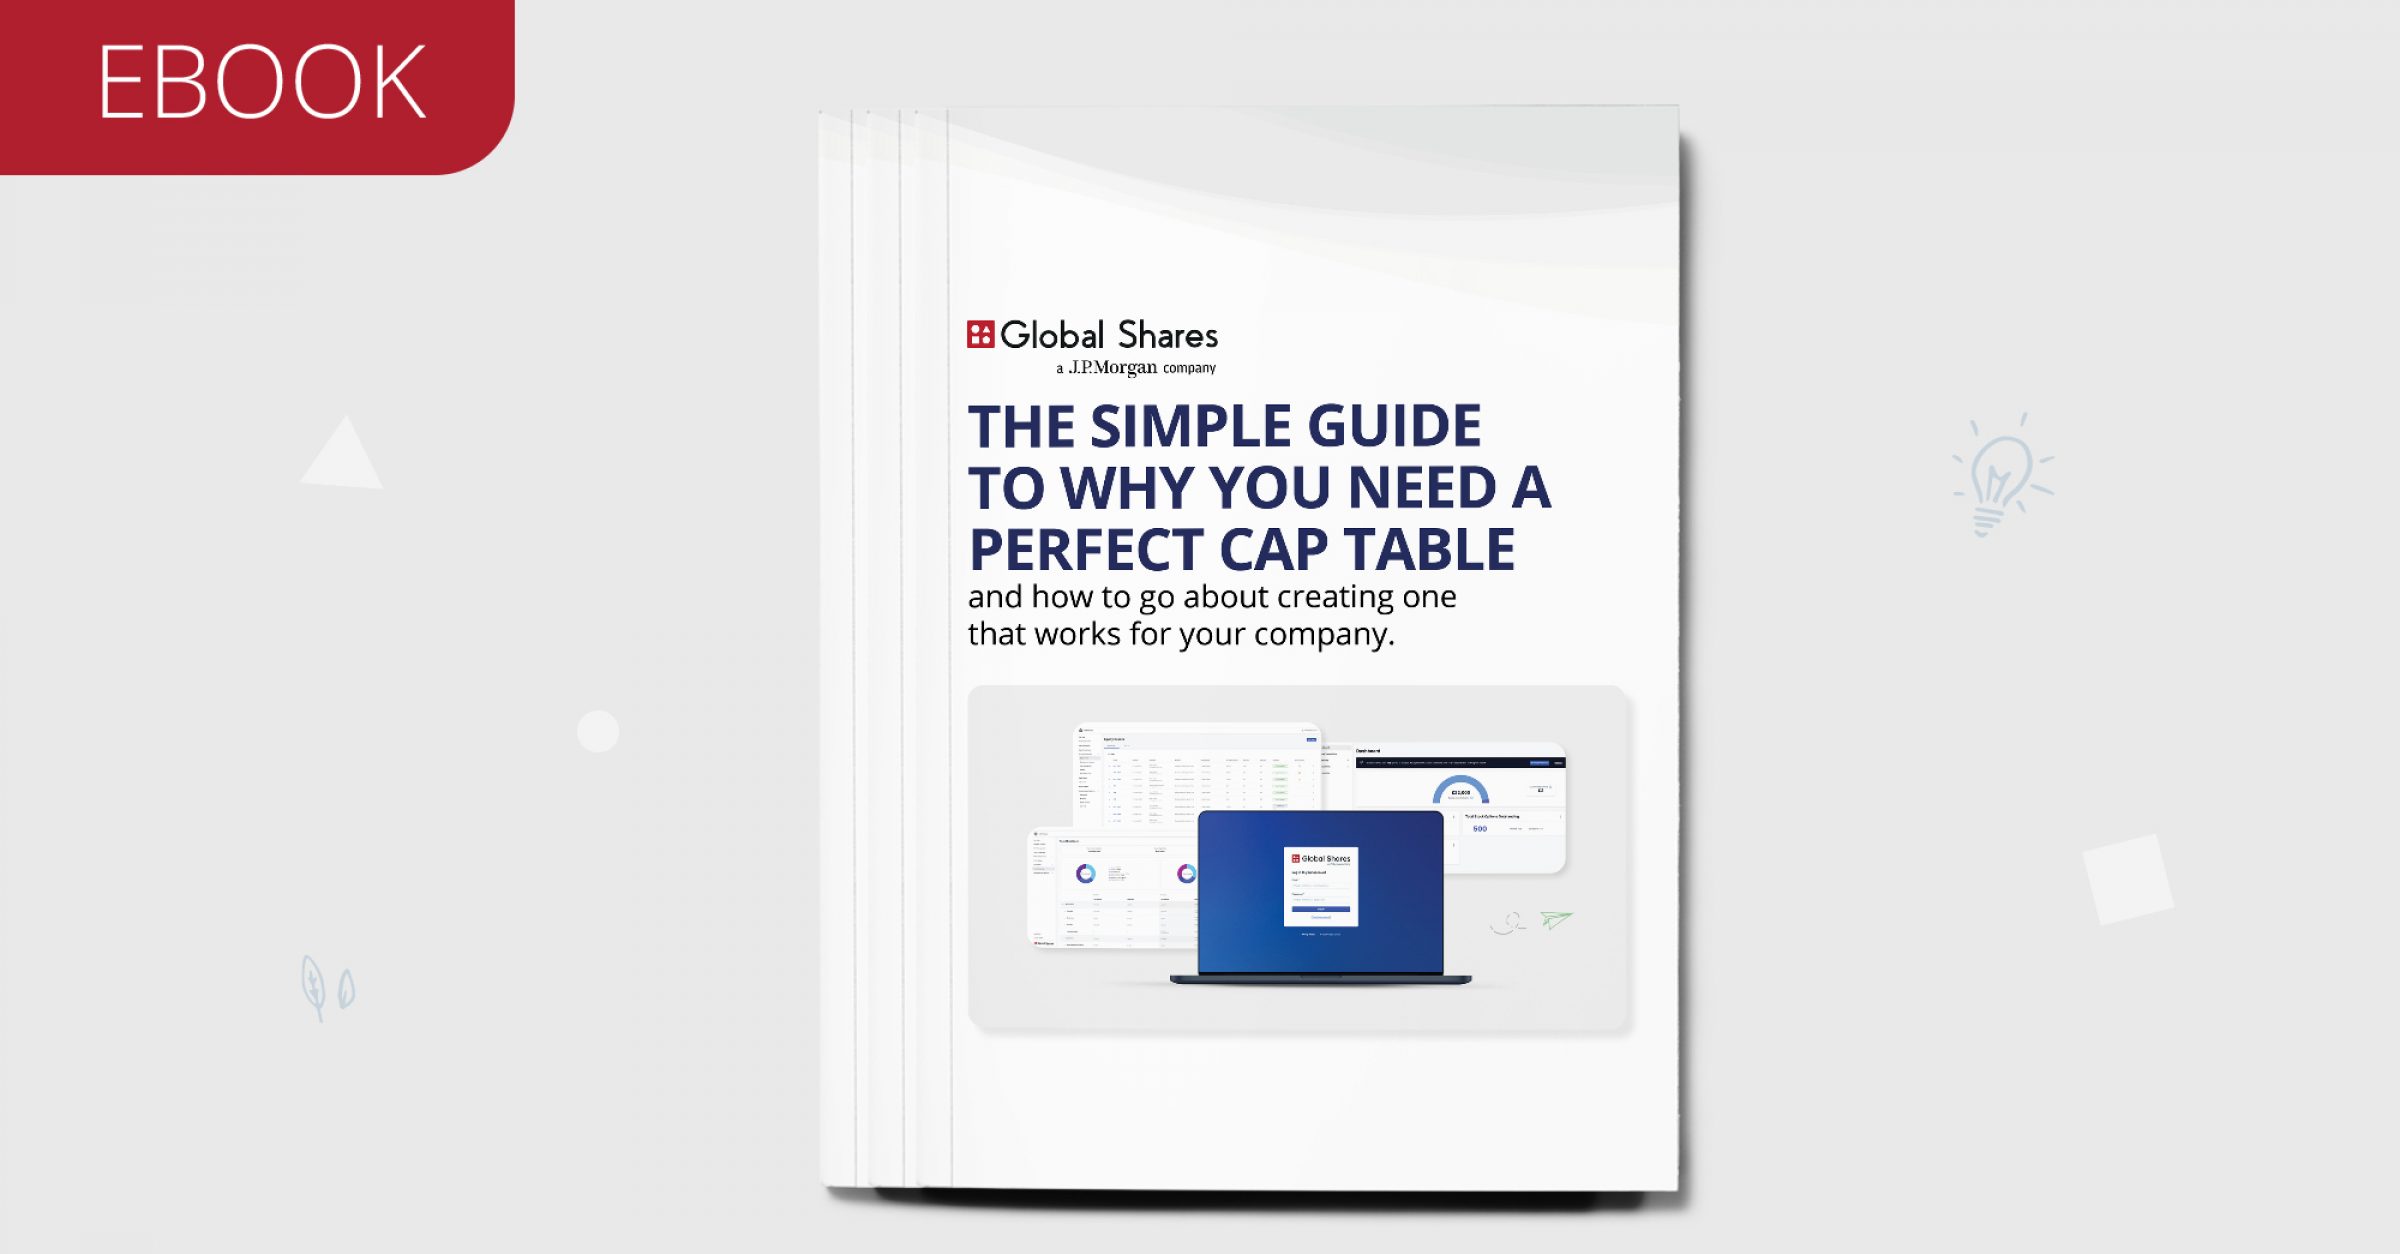 Free eBook: The Simple Guide To Why You Need A Perfect Cap Table (and how to go about creating one that works for you company)